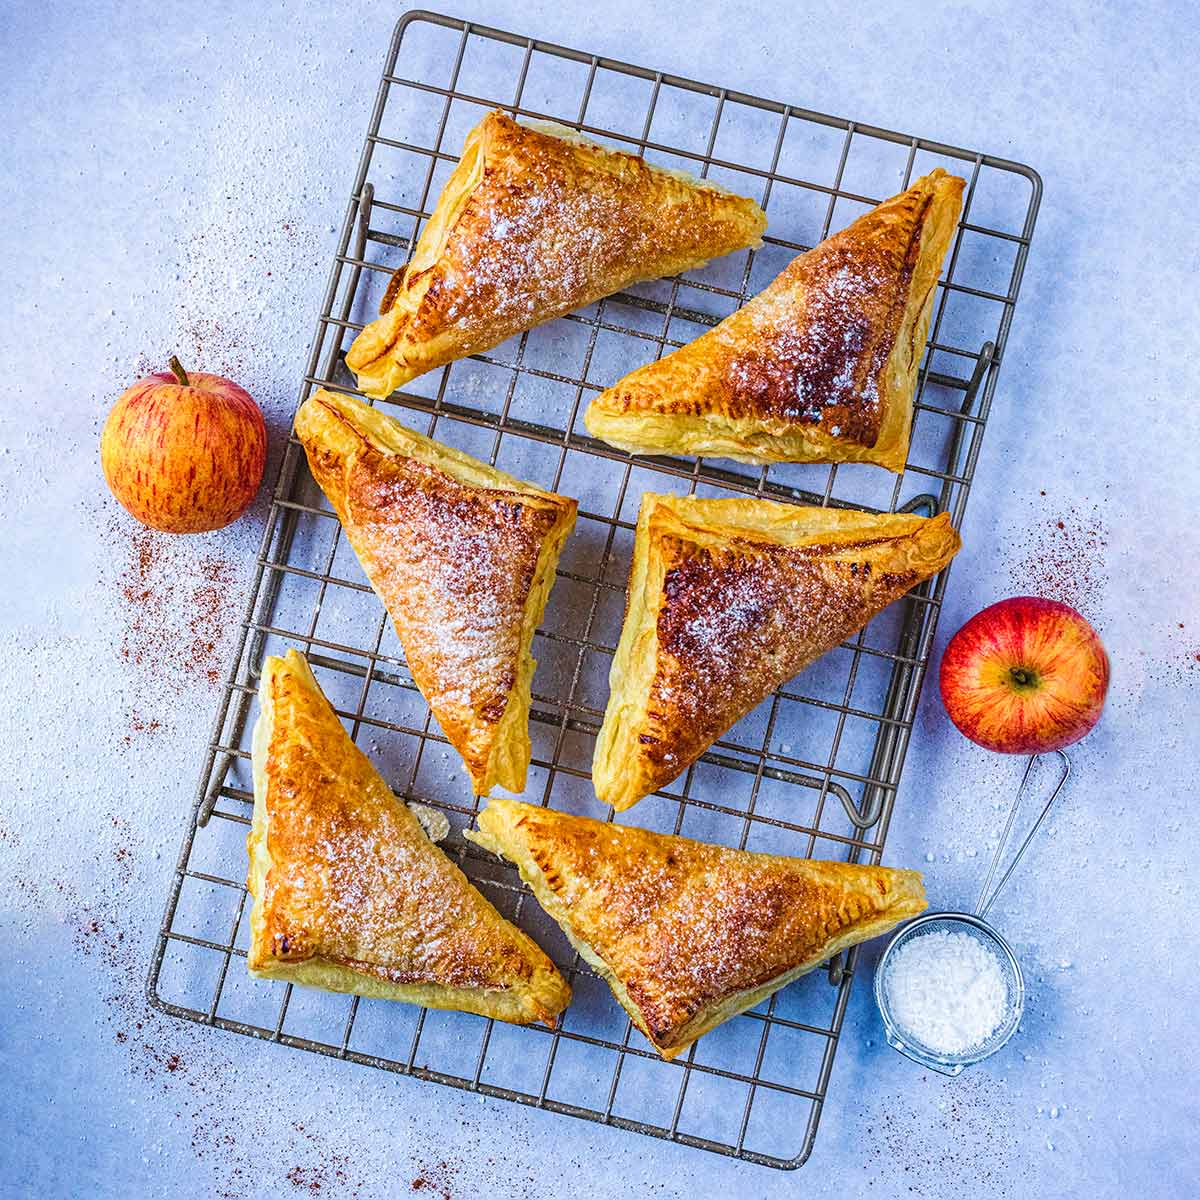 https://hungryhealthyhappy.com/wp-content/uploads/2021/11/Apple-Turnovers-featured.jpg